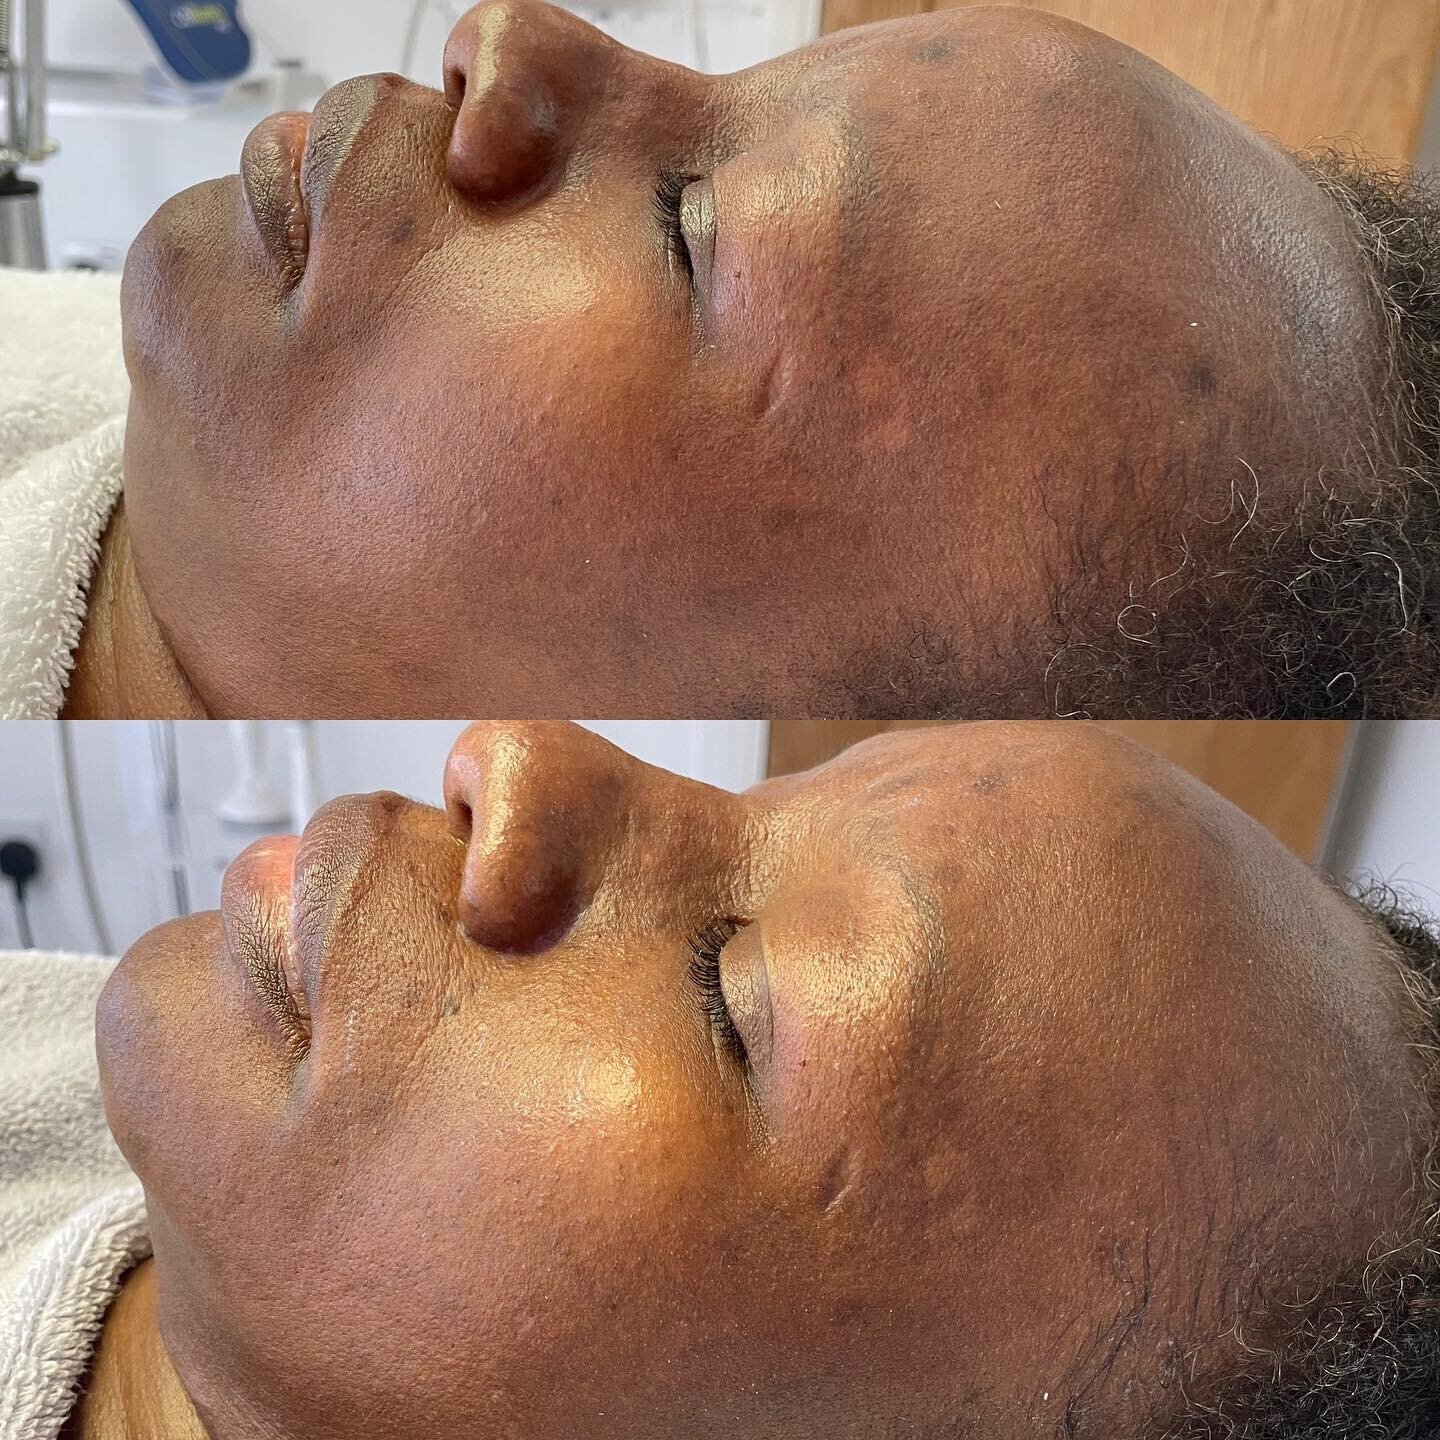 Depigmentation Treatment. Results to be continued for this client, can&rsquo;t wait to see the end result ✨

MELA Resurfacer is one of our most effective skin treatments that treats melasma, reduces skin pigmentation and evens skin tone. 

Book in fo